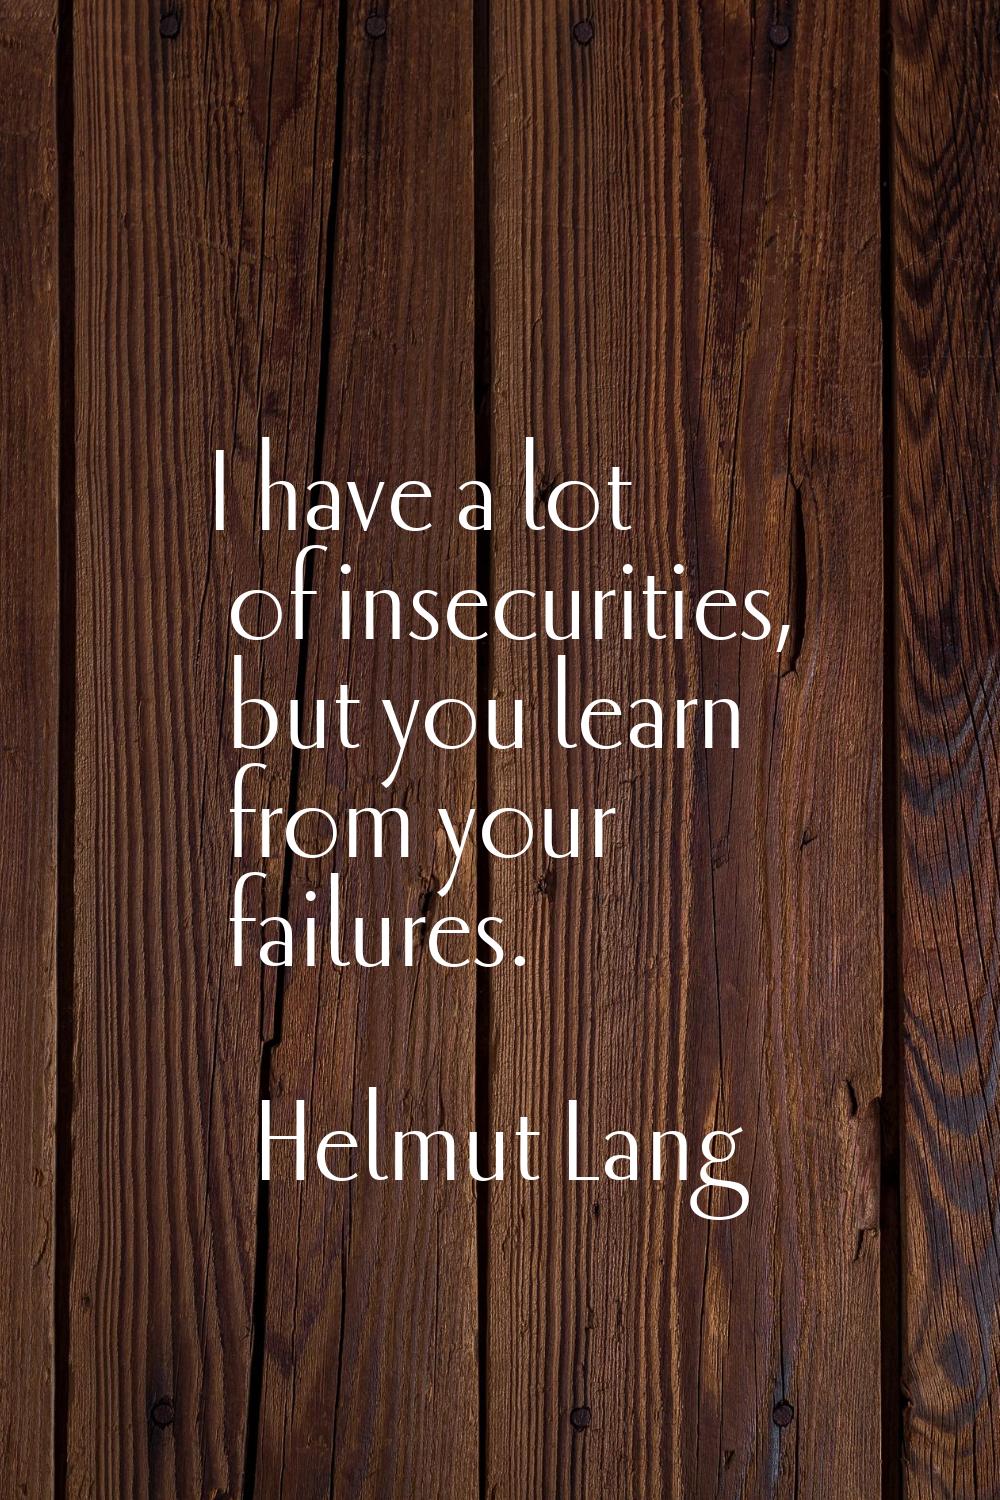 I have a lot of insecurities, but you learn from your failures.